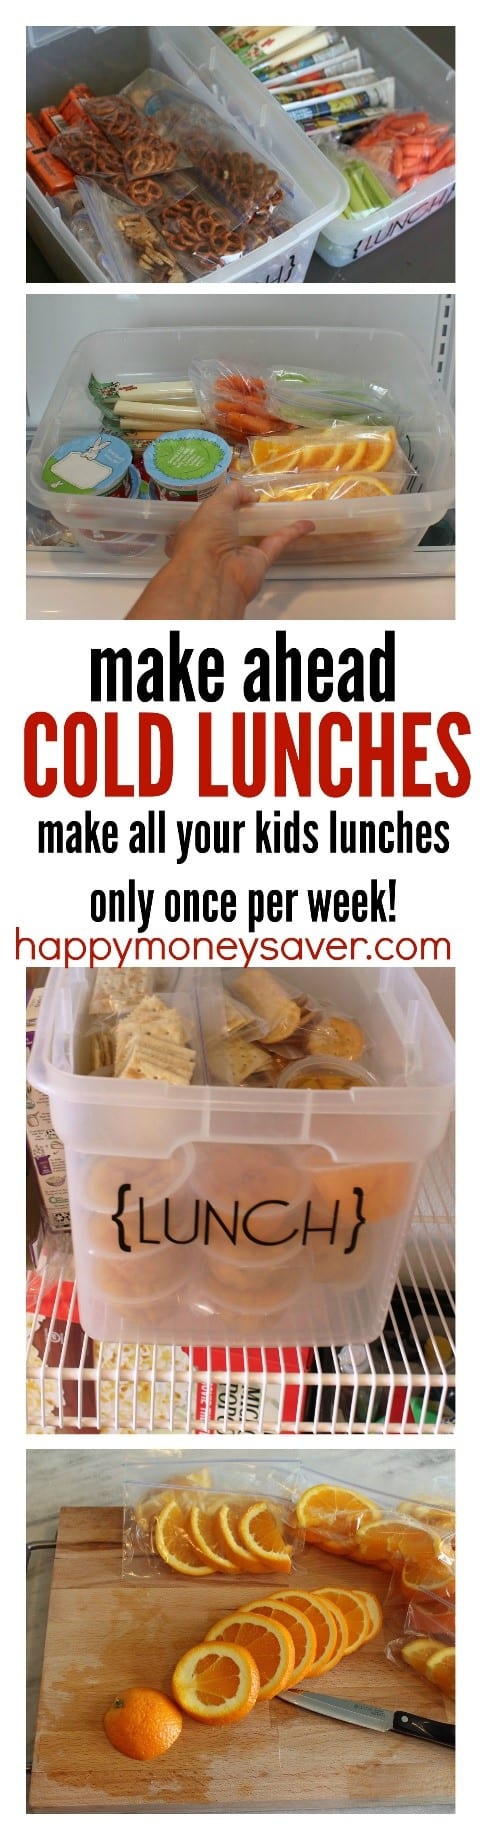 Awesome kids lunch ideas for helping save time. Make all your lunches in one day for the week and have your kids grab their own lunch and pack it easily each morning before school. I have done this method for years and it works!!